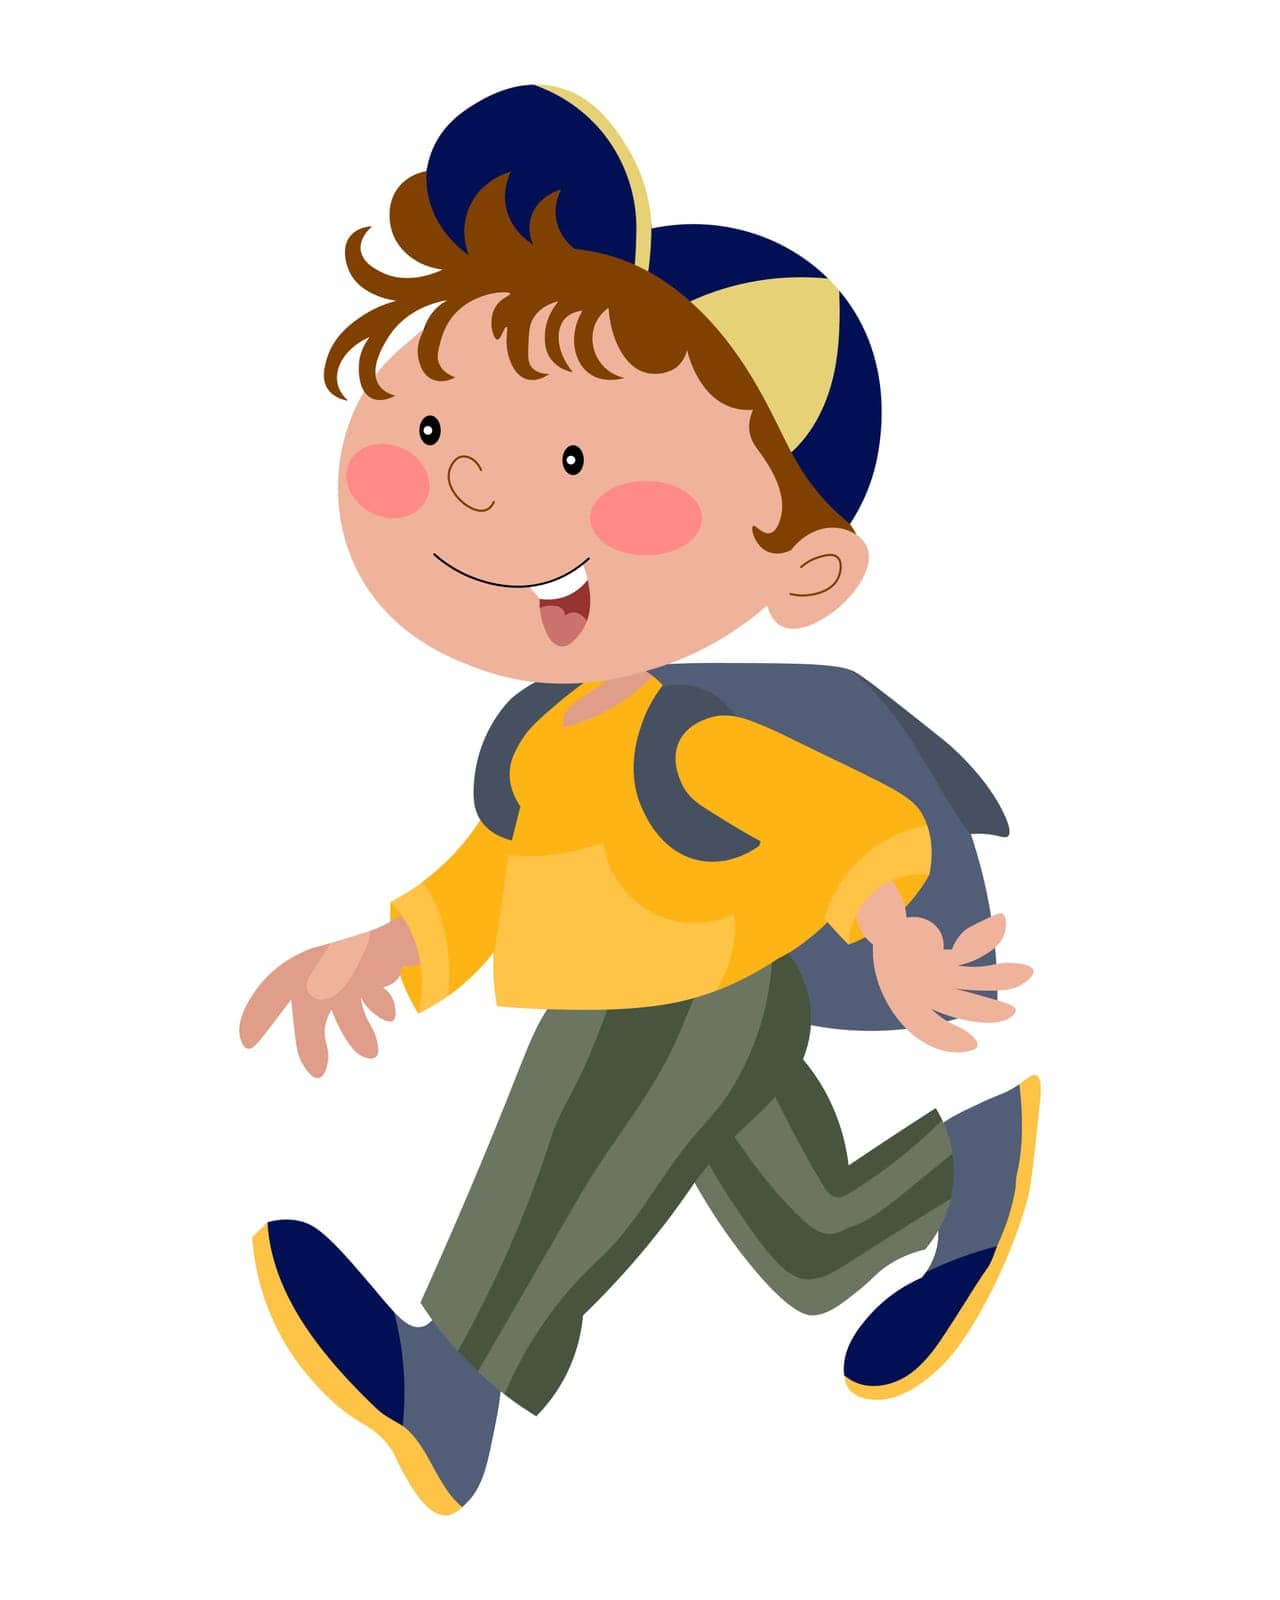 Cute little boy with school backpack. Illustration, cartoon style by VS1959